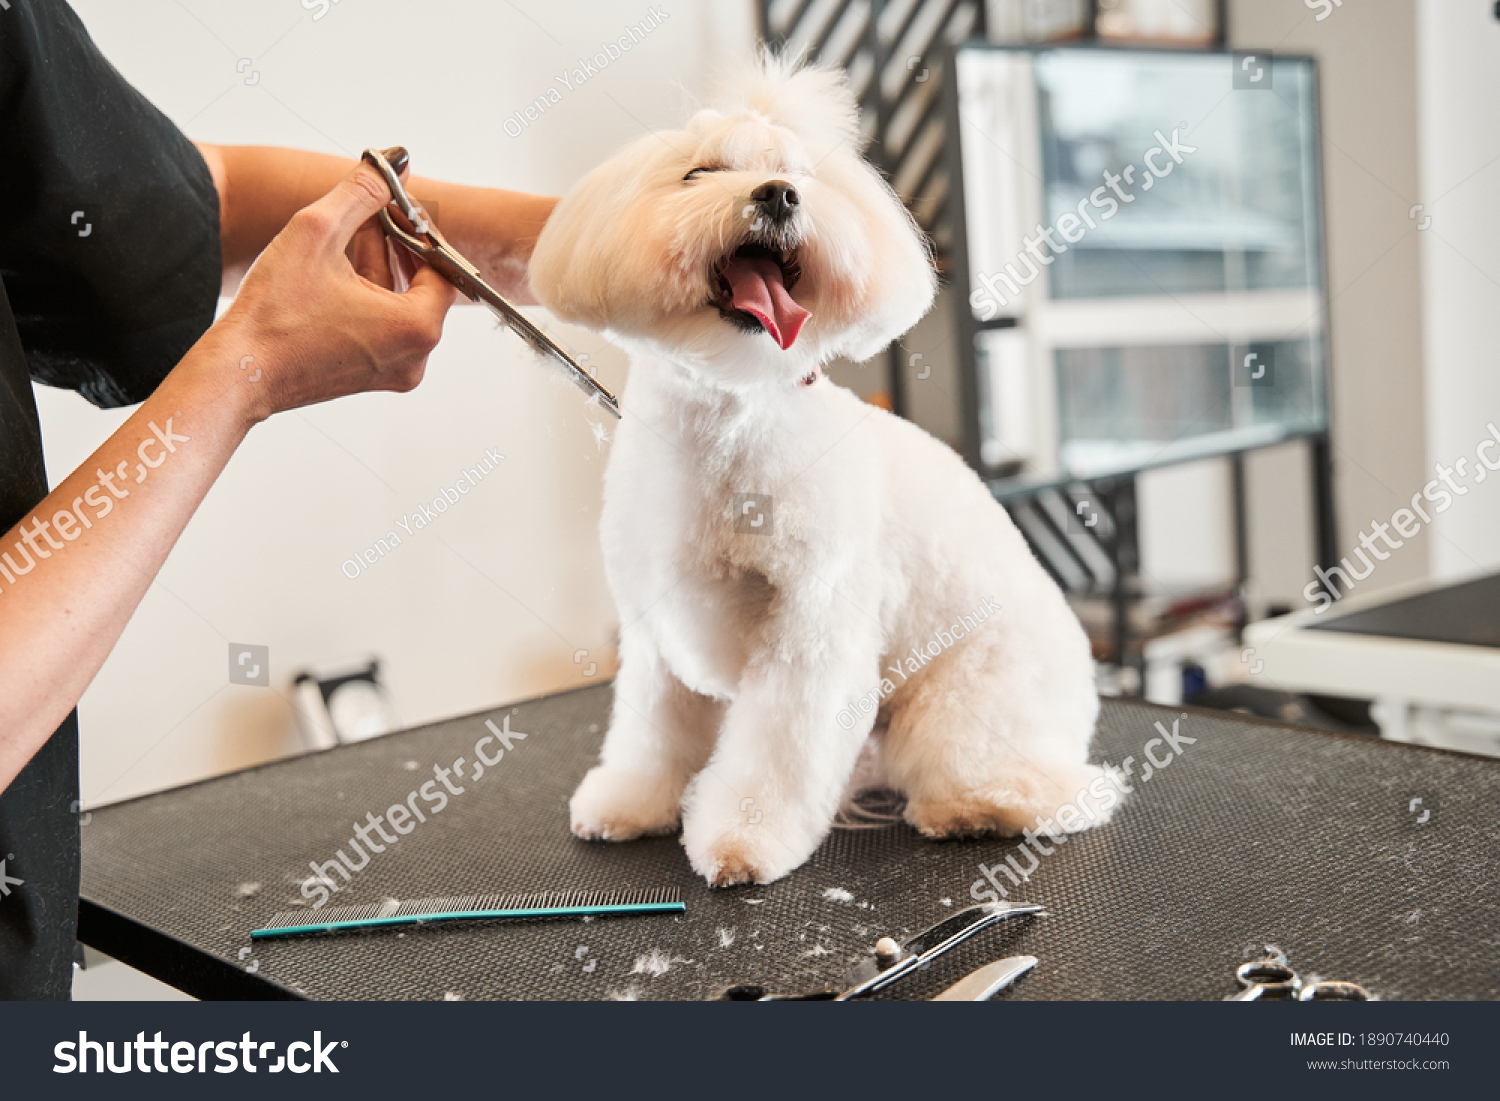 Dog grooming service. Hairdresser holding scissors near the dog and other equipment laying at the table. Groomer cutting fur of domestic animal. Pet sitting on table in grooming salon #1890740440